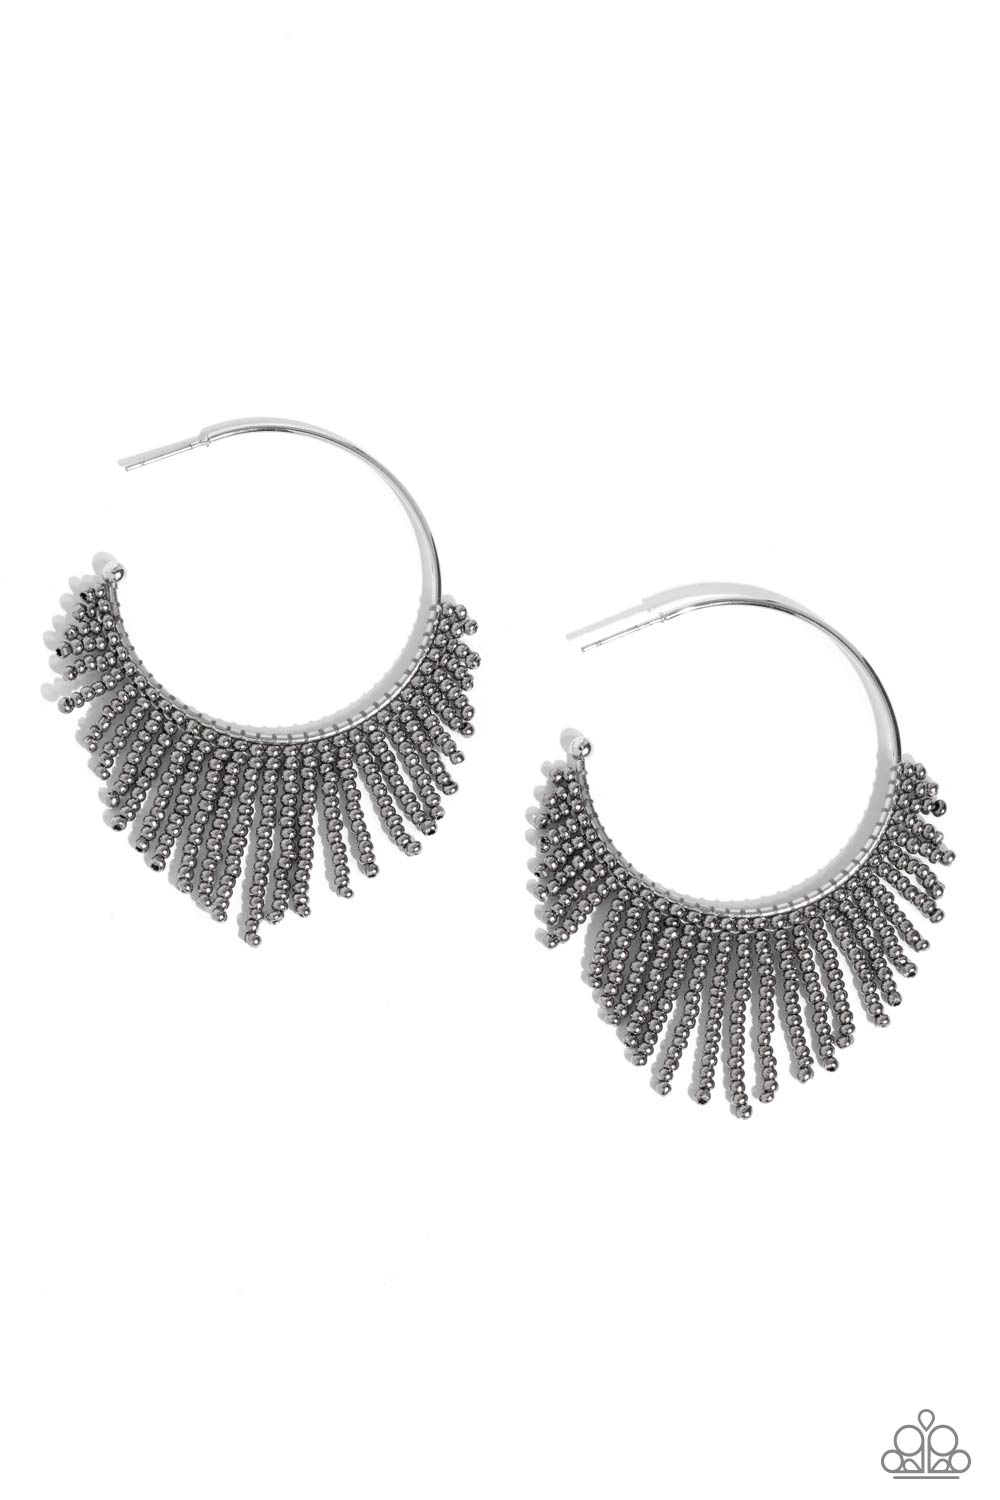 Tailored Tassel Silver Hoop Earrings - Paparazzi Accessories- lightbox - CarasShop.com - $5 Jewelry by Cara Jewels